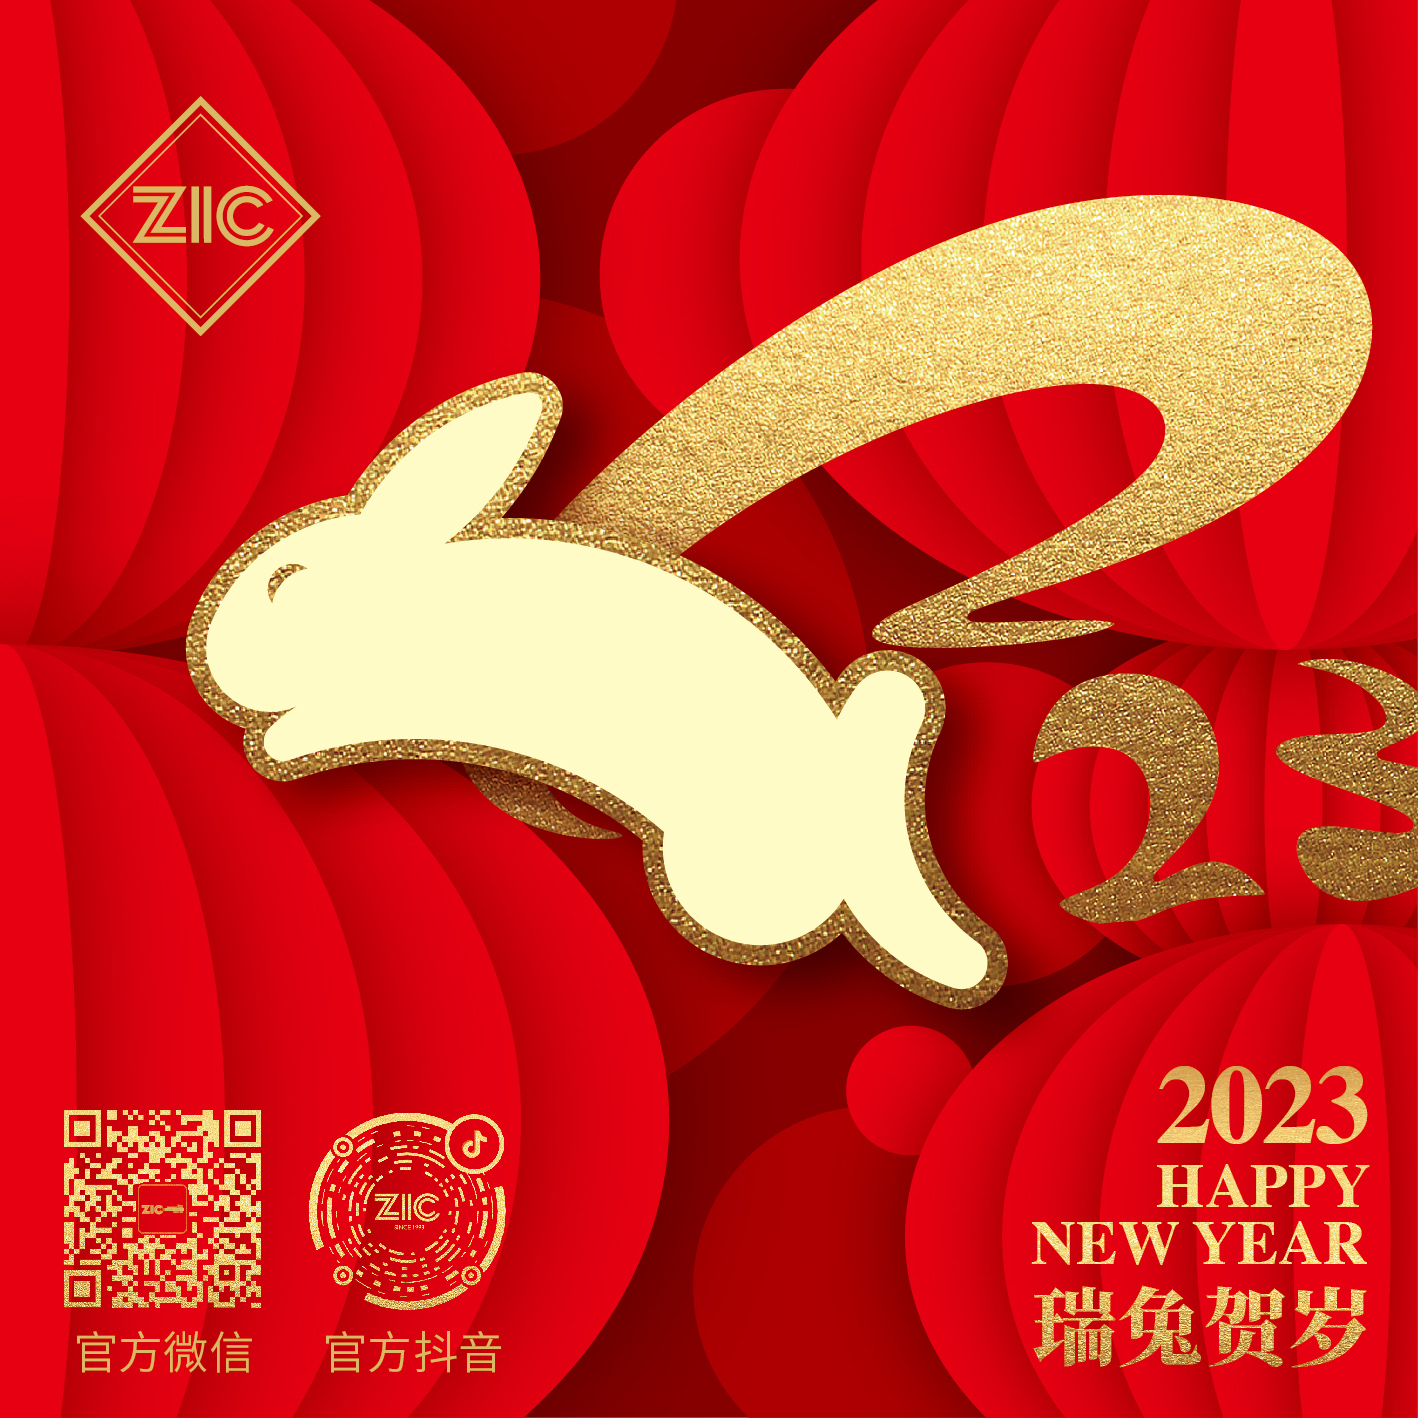 ZIC wishes you a happy and prosperous Year of the Rabbit!